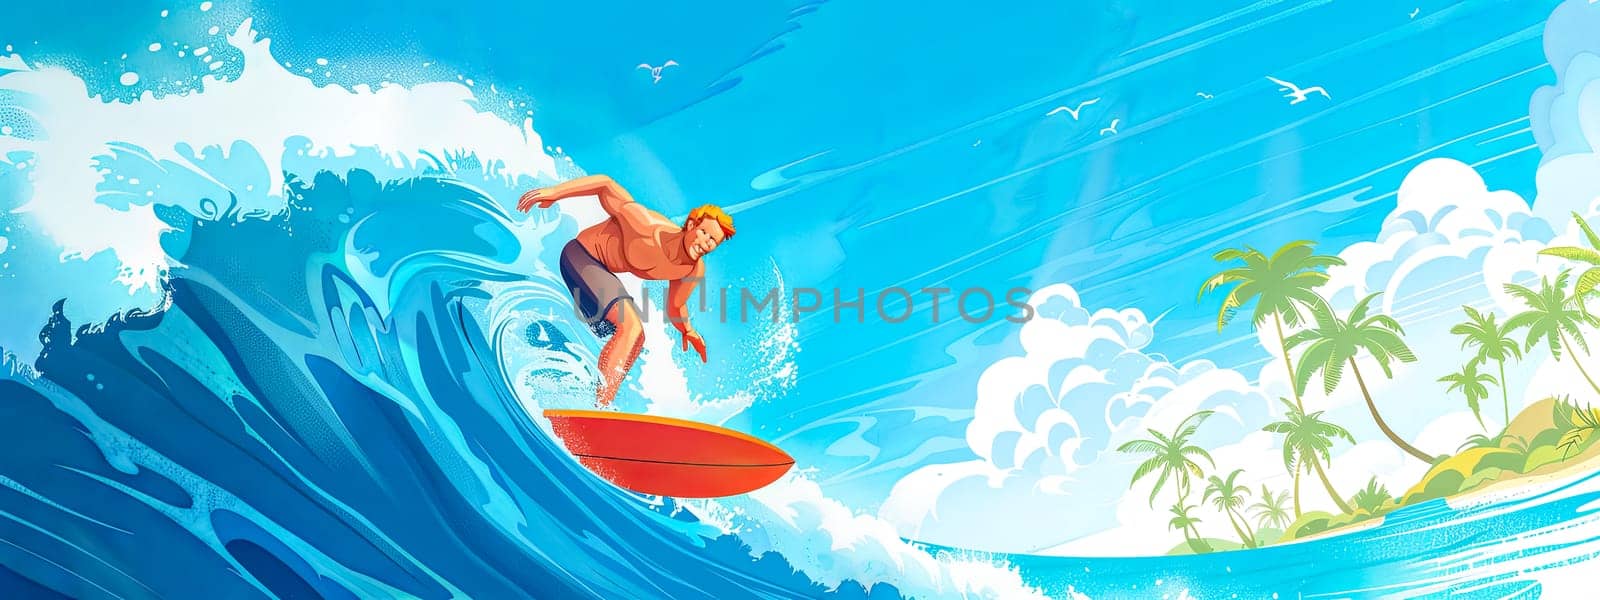 Animated illustration of a muscular surfer on a red board, conquering a large blue wave with tropical palms in the background